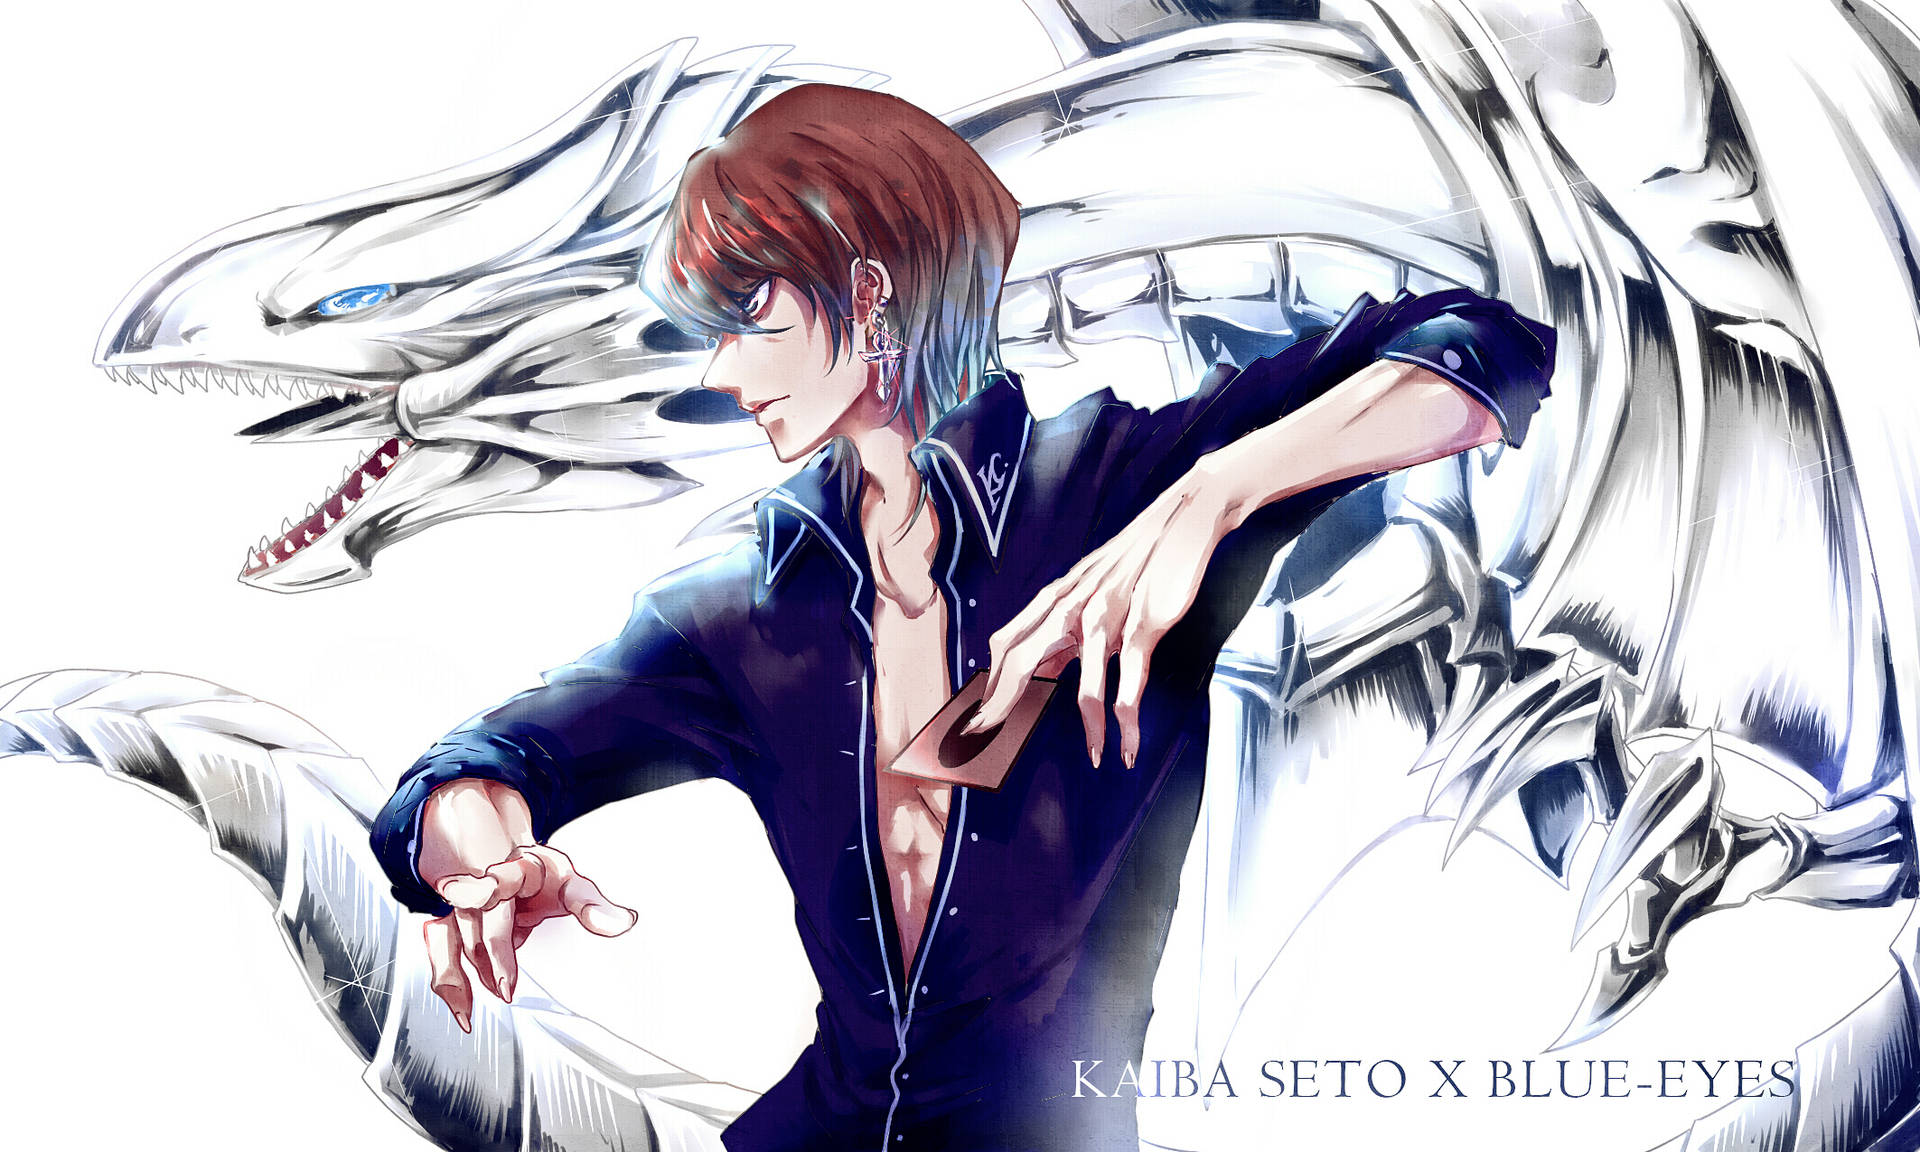 Kaiba is Dueling with his Legendary Blue-Eyes White Dragon Wallpaper